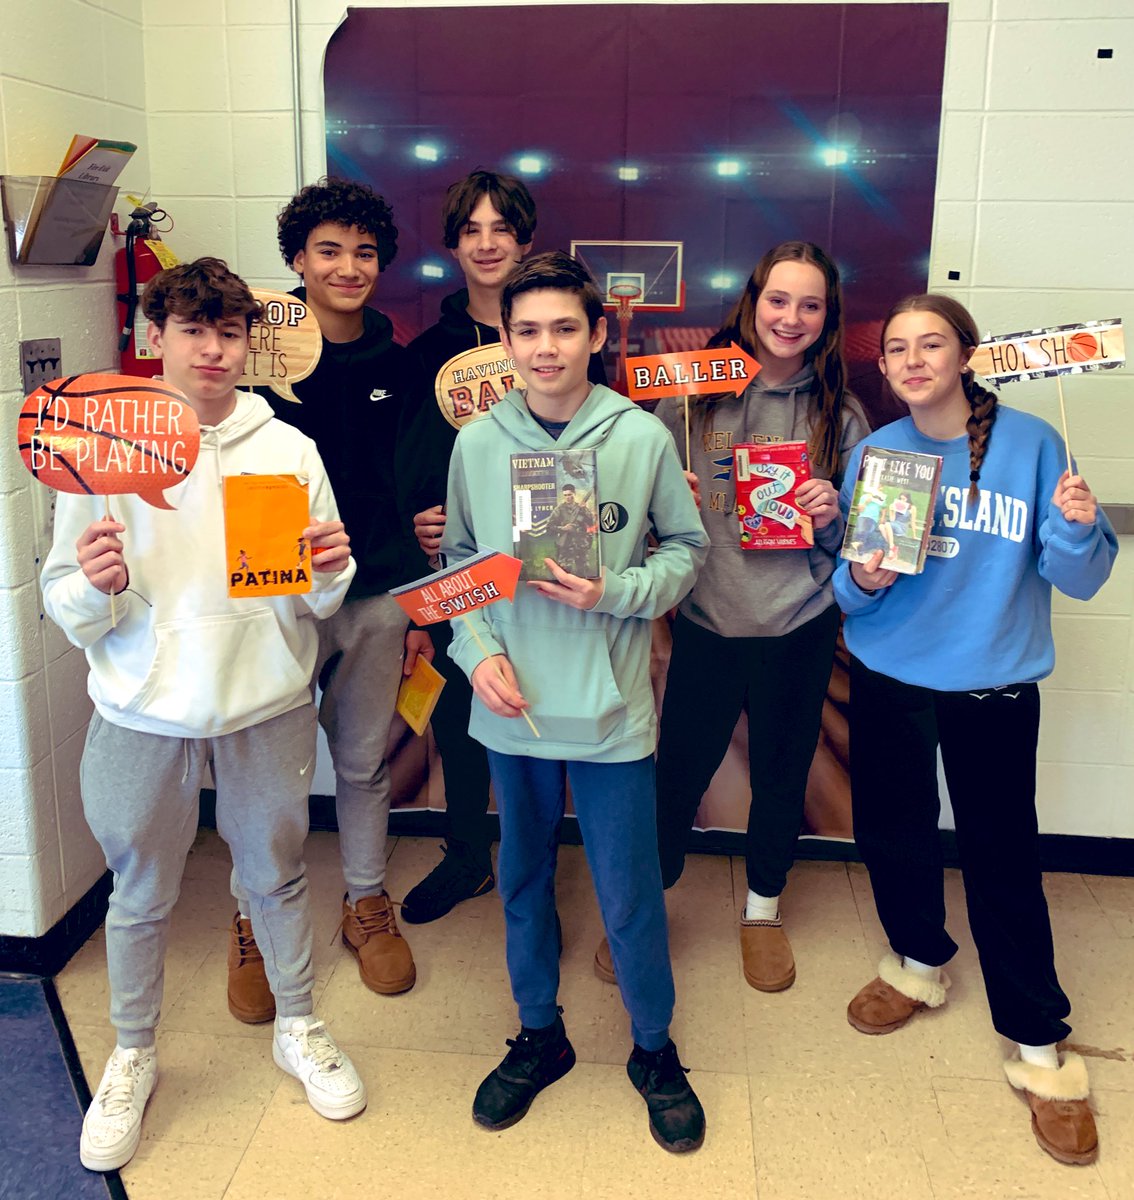 Another amazing day with @Mrs_Lupia_ team! Ss gave a Critic’s Review using @MicrosoftFlip for Round 2 of March Book Madness. Great energy and creativity on display! Congratulations to our winners. Can’t wait for Round 3 next week!! #marchbookmadness #middleschoollibrary #booklove